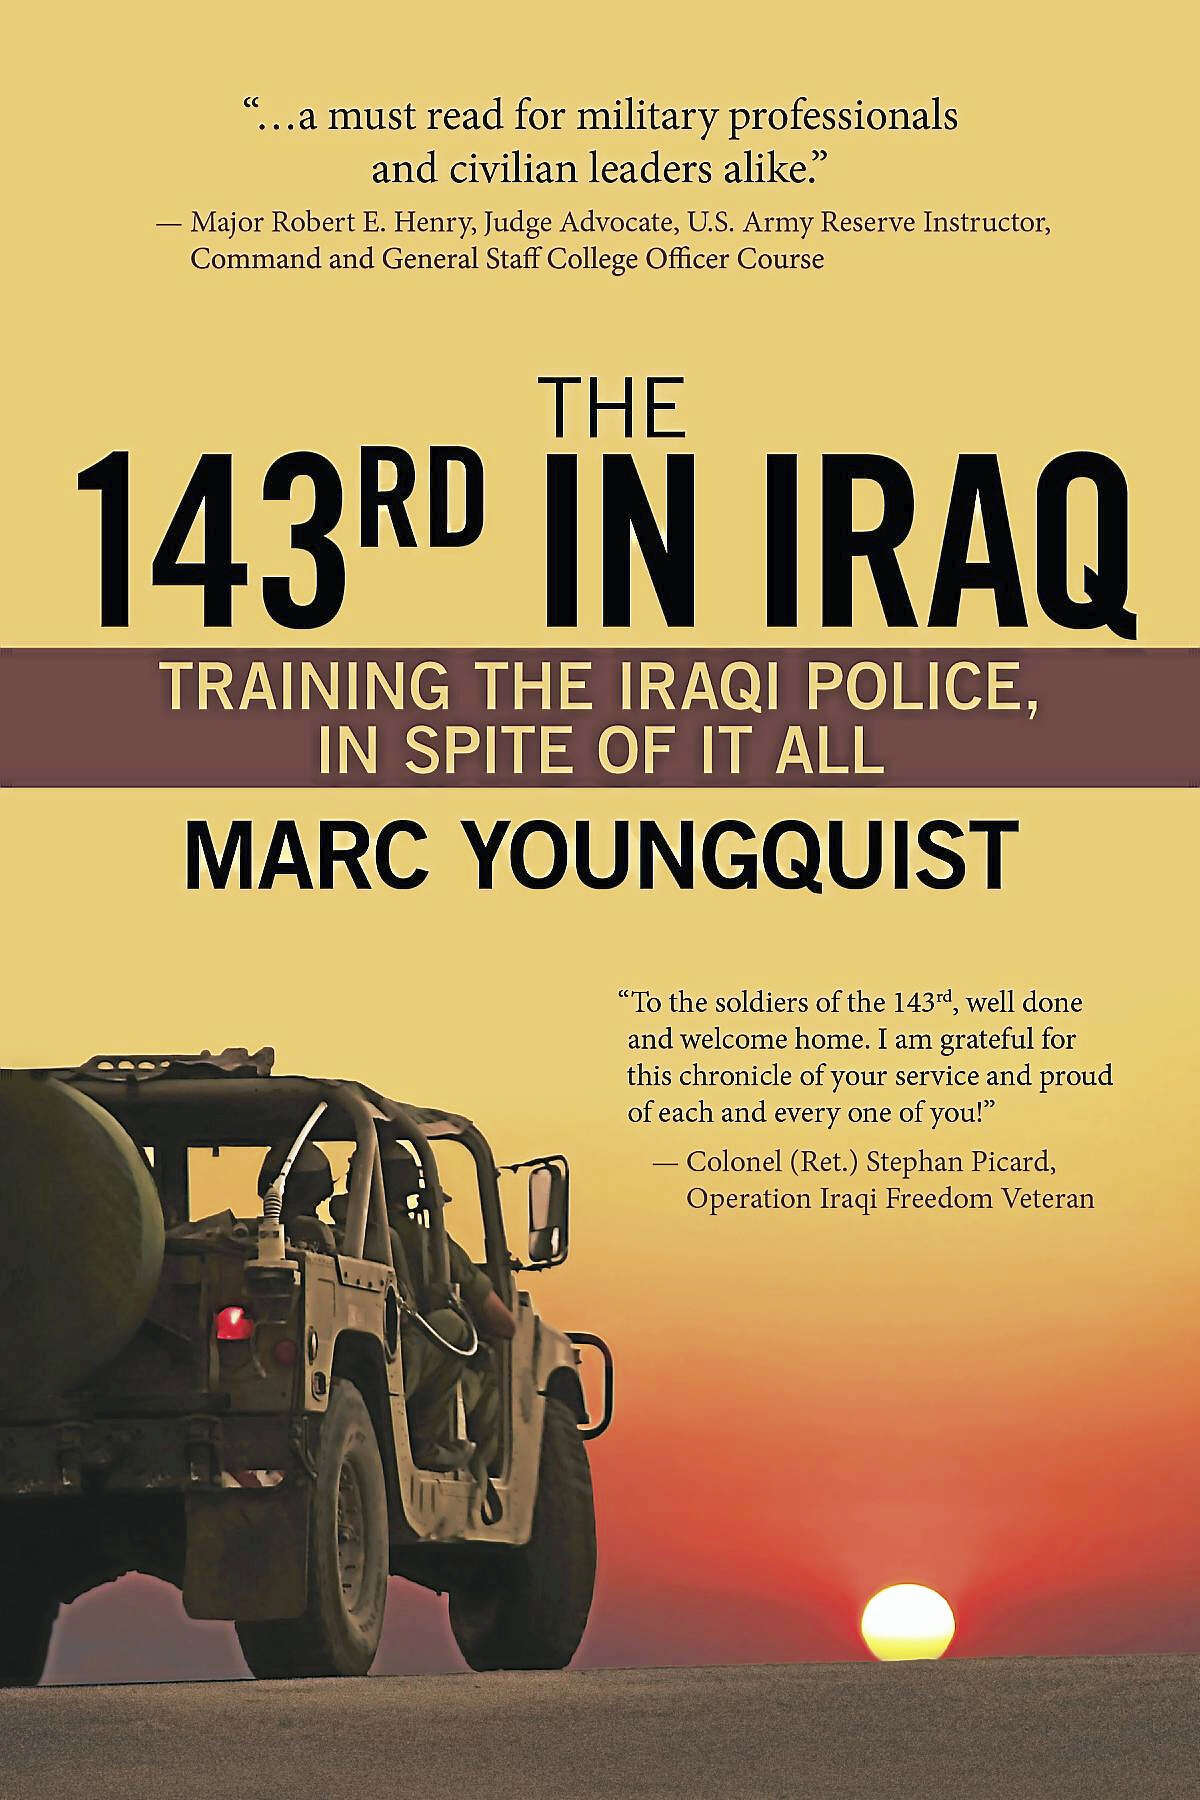 “The 143rd in Iraq, Boots on the Ground Training Iraqi Police in Spite of it All”